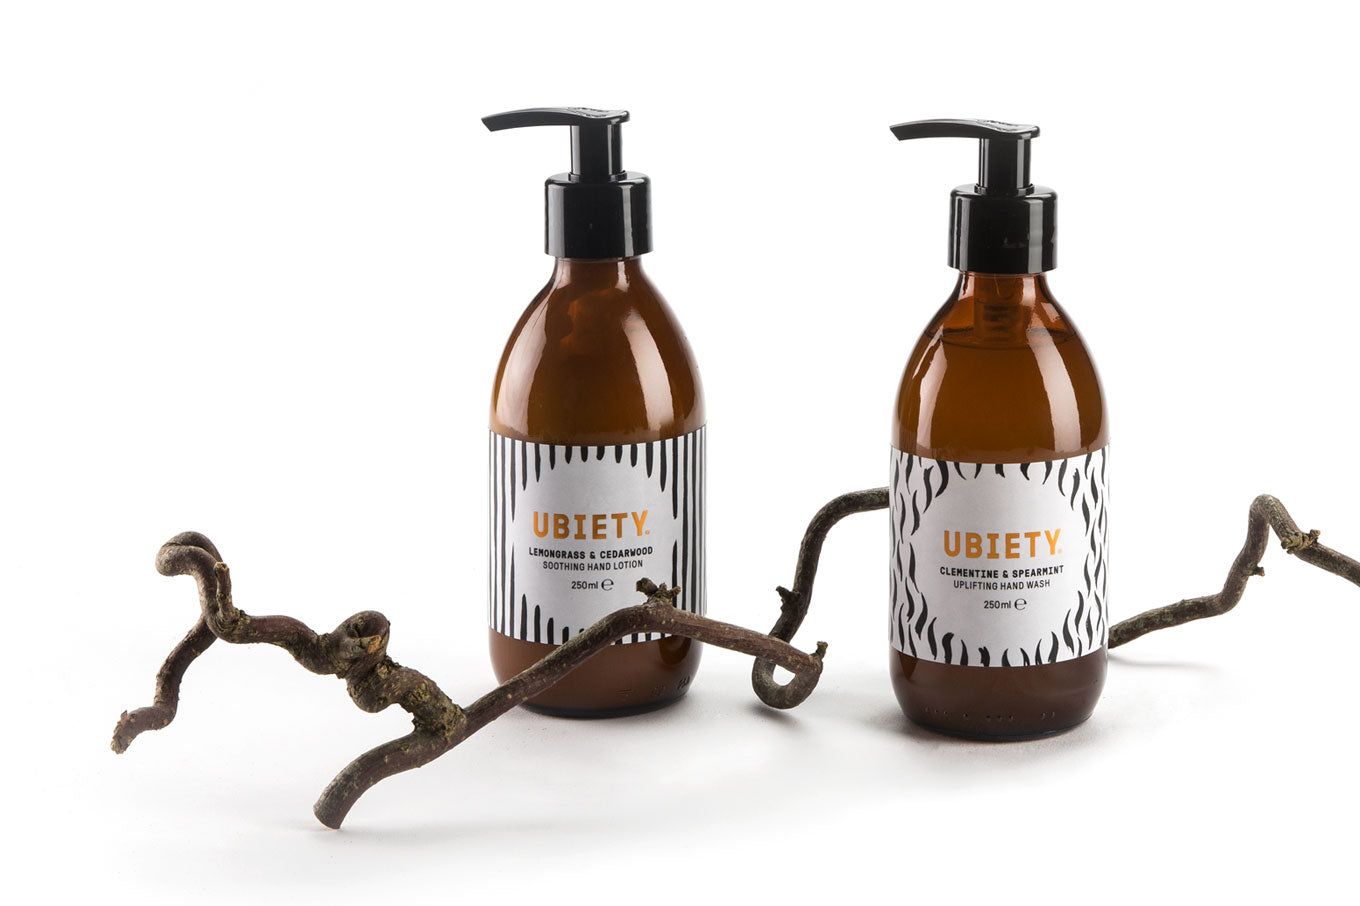 Our uplifting hand wash and soothing hand lotion